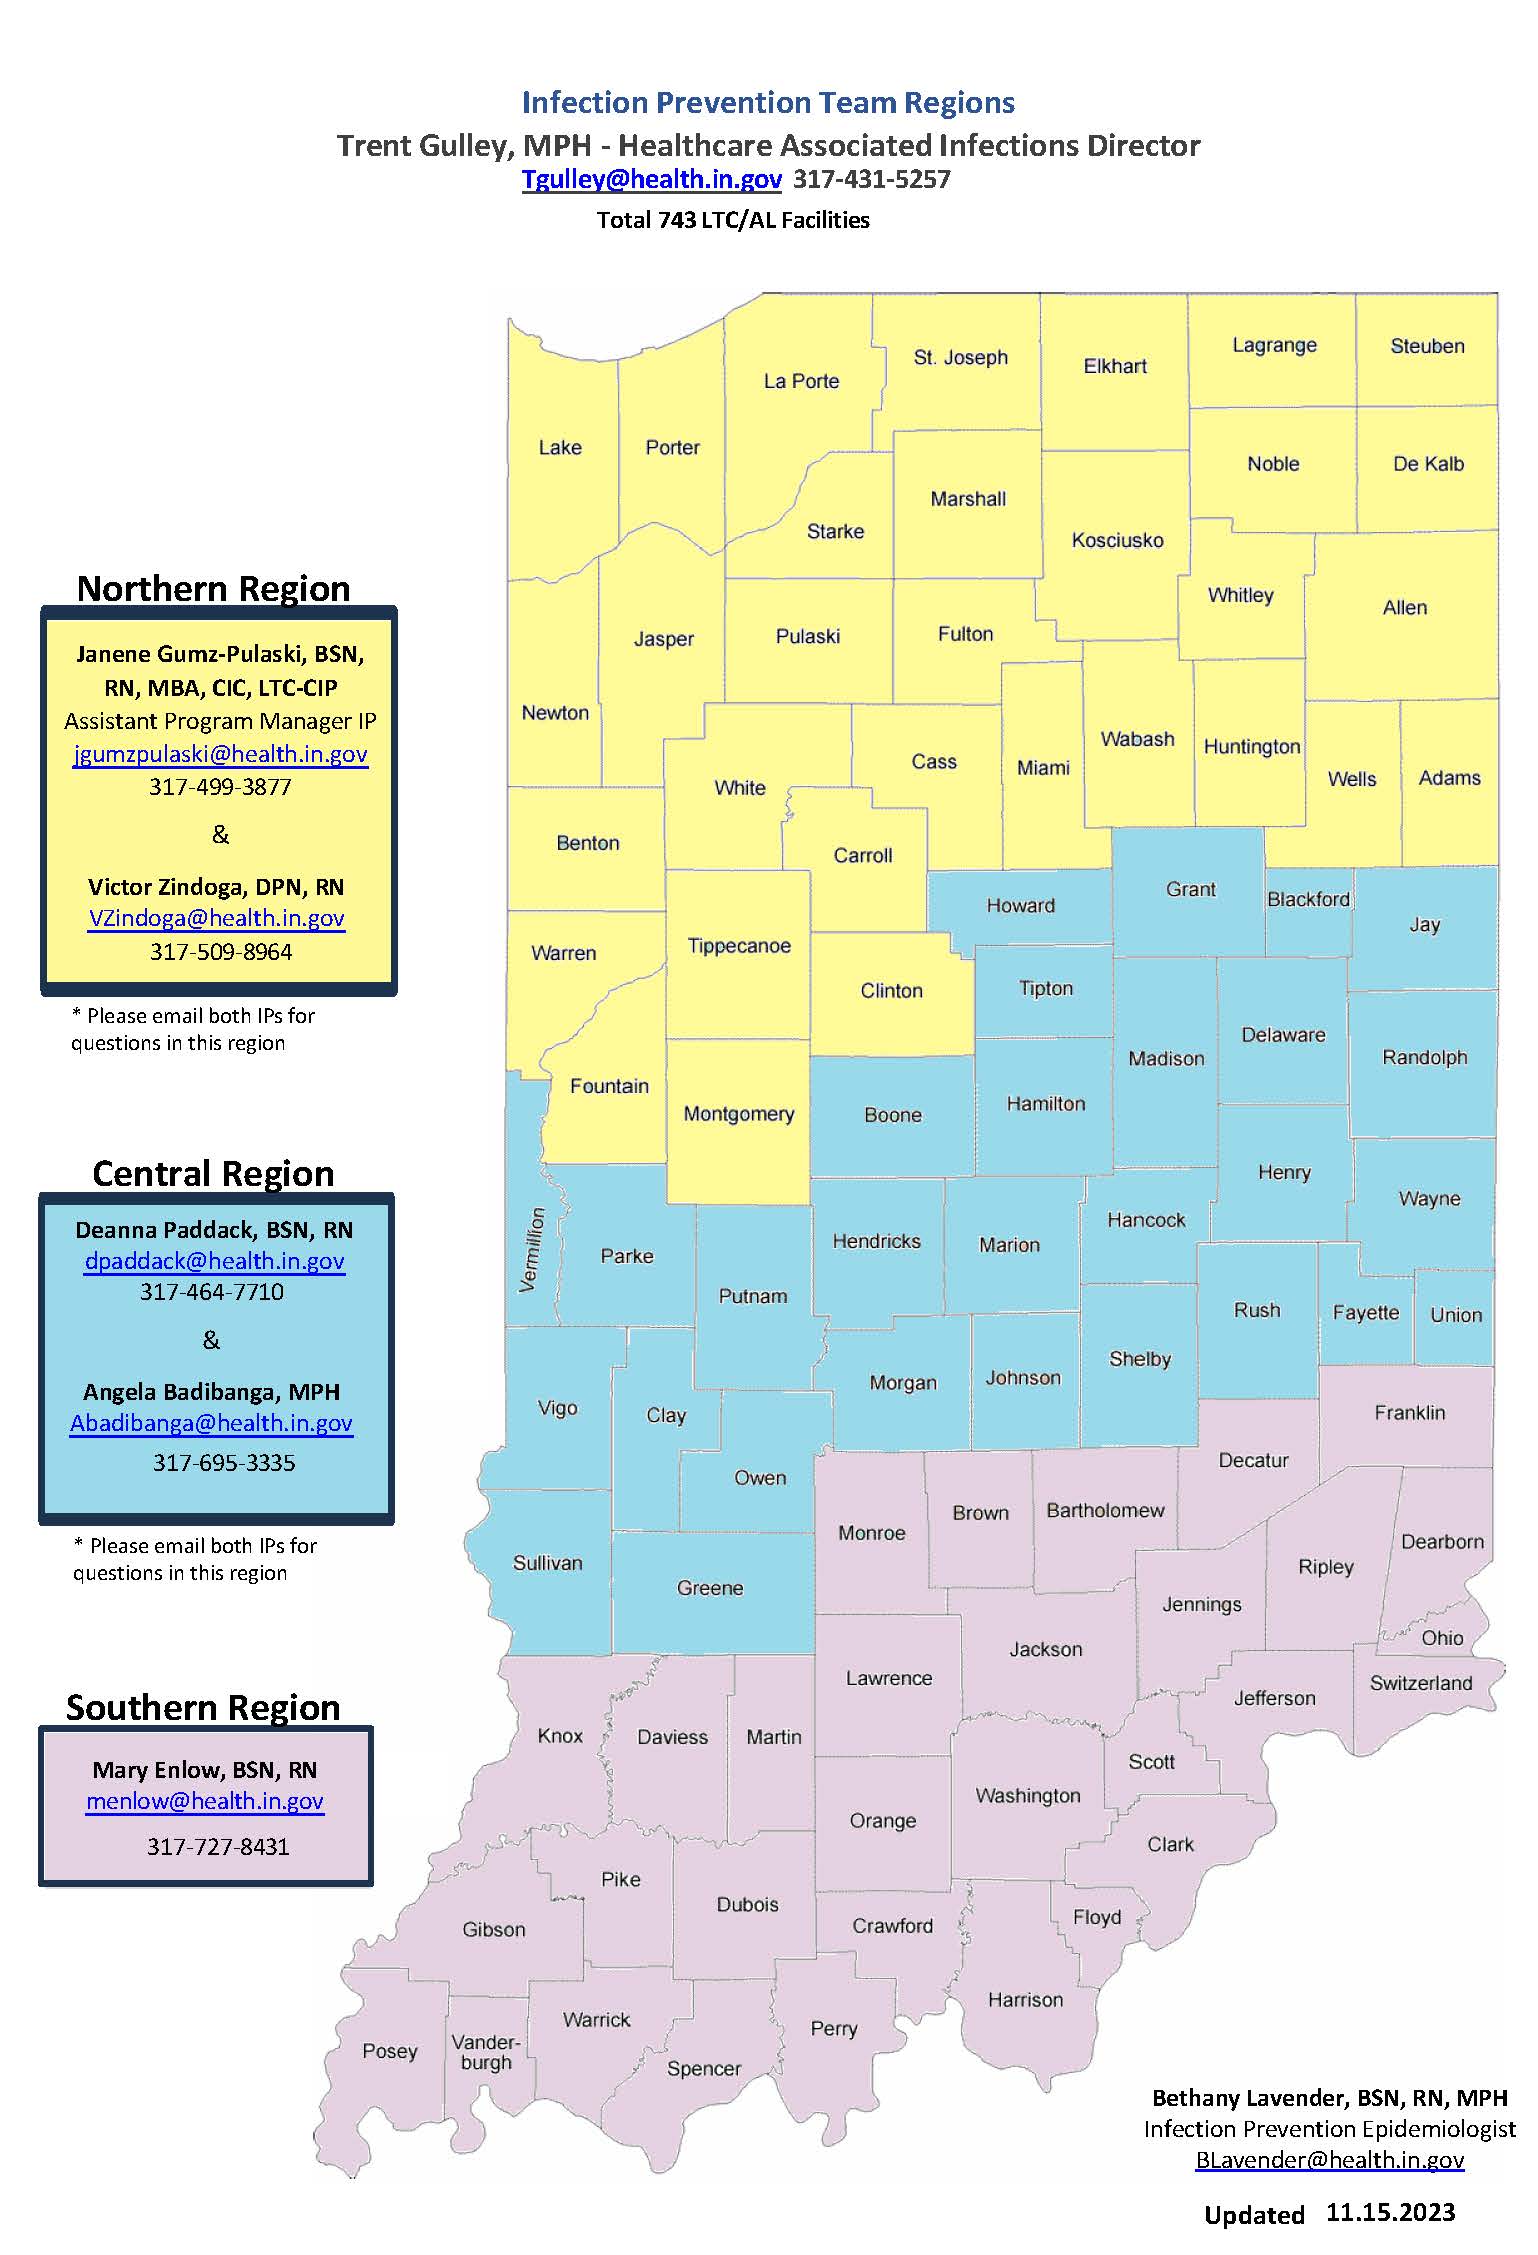 Indiana Infection Prevention Coverage by Region